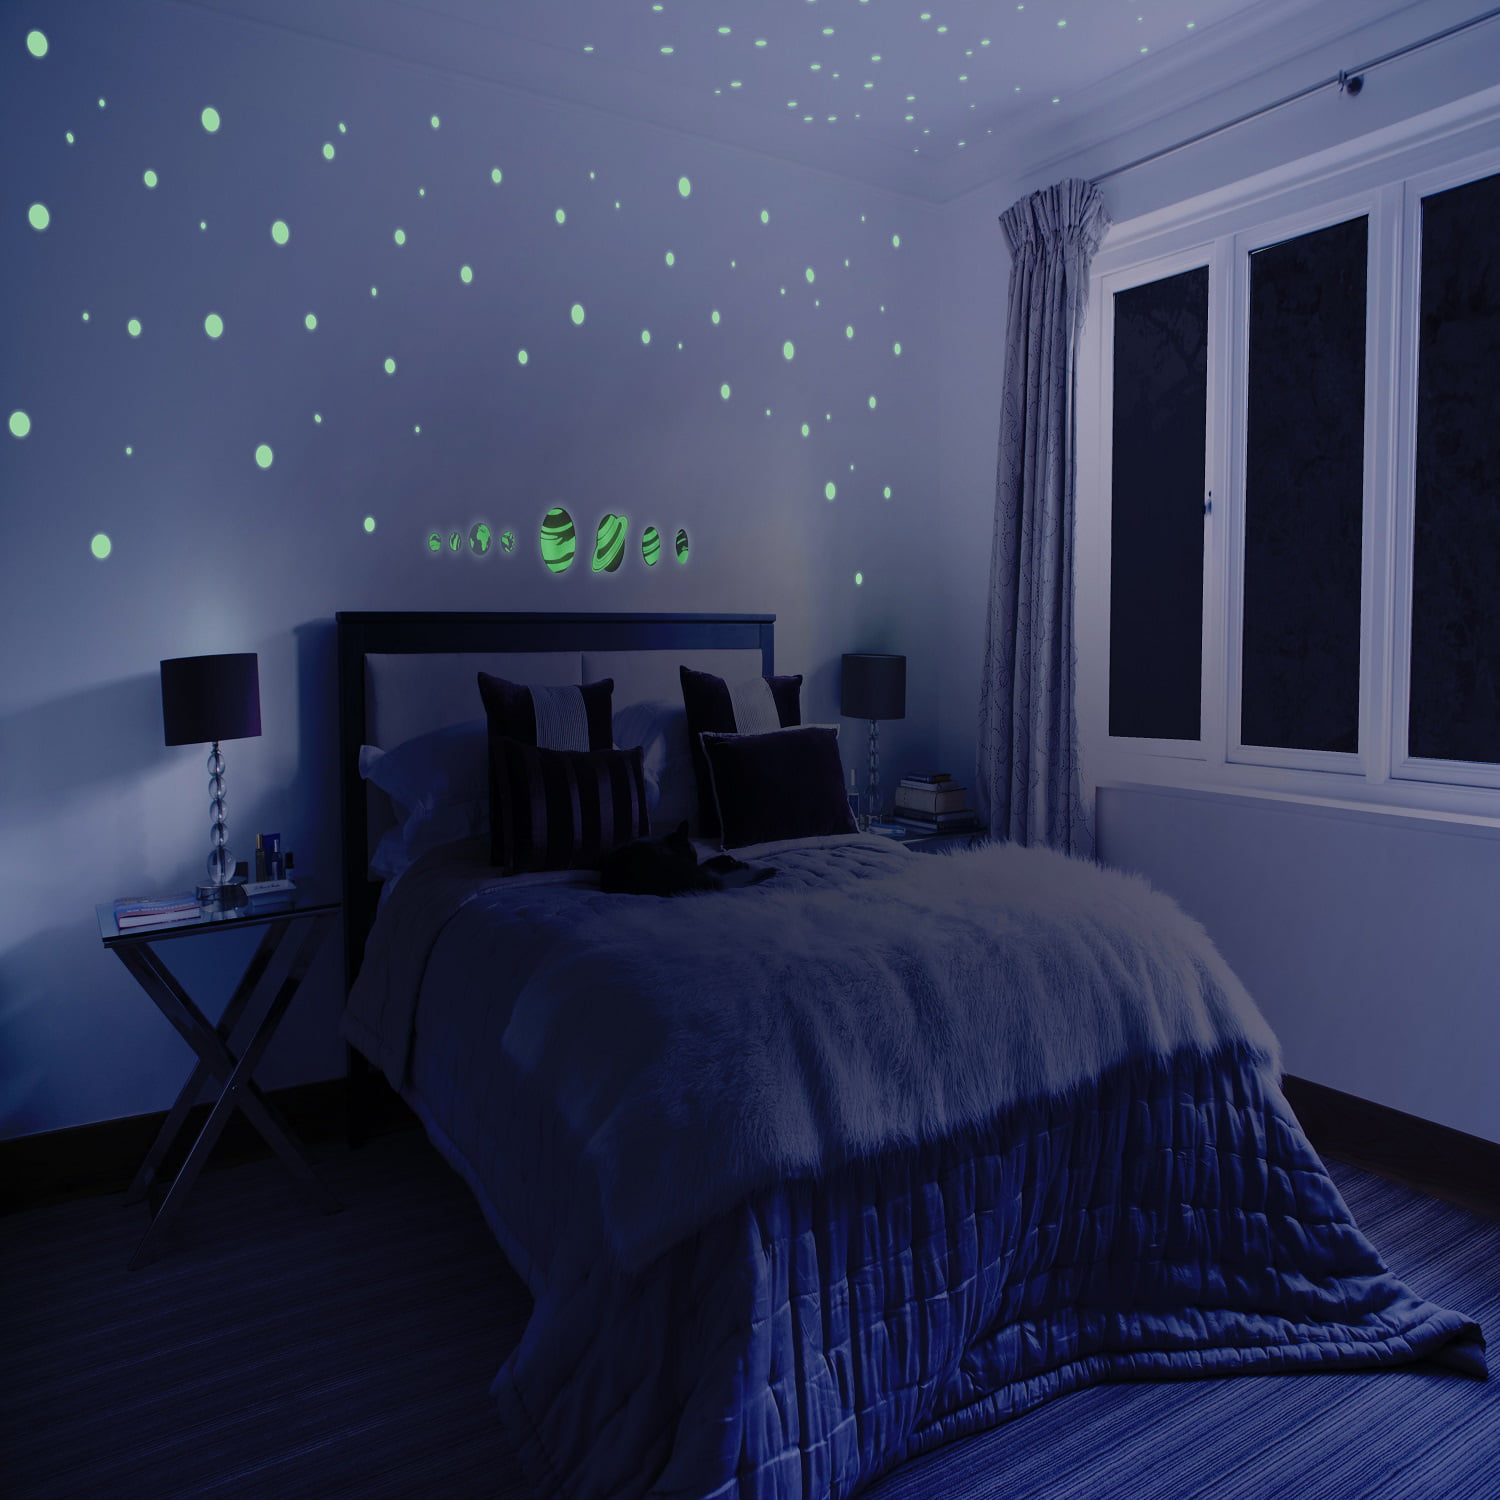 Glow In The Dark Planets And Stars For Kids Self Adhesive Glowing Star And Planet Decal For Children S Bedrooms Glow In The Dark Constellation Ceiling